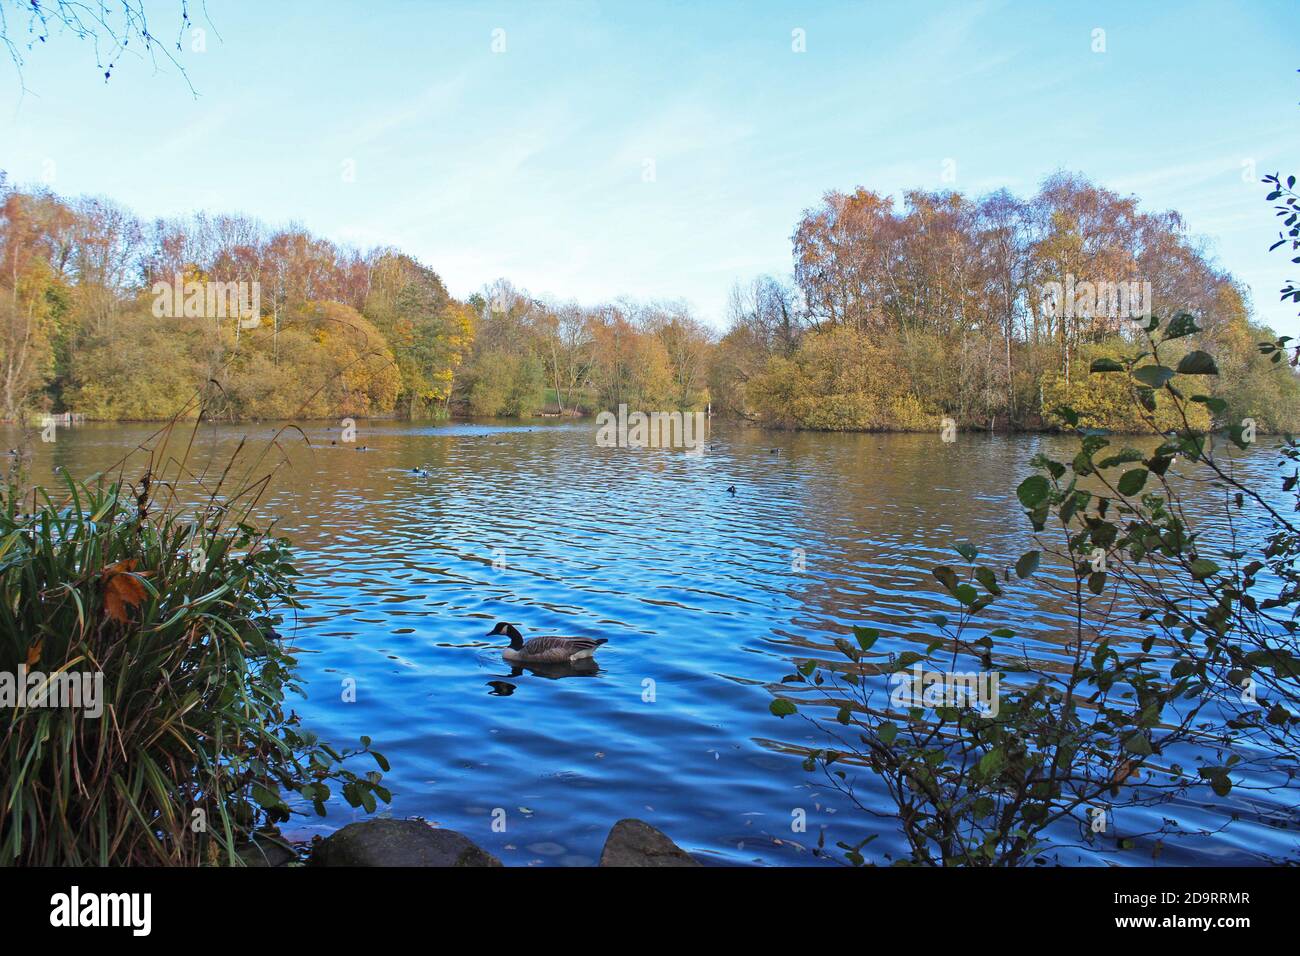 Big blue lake with Canada geese swimming and big autumn bushes and trees on the banks in Chorlton water park, England Stock Photo